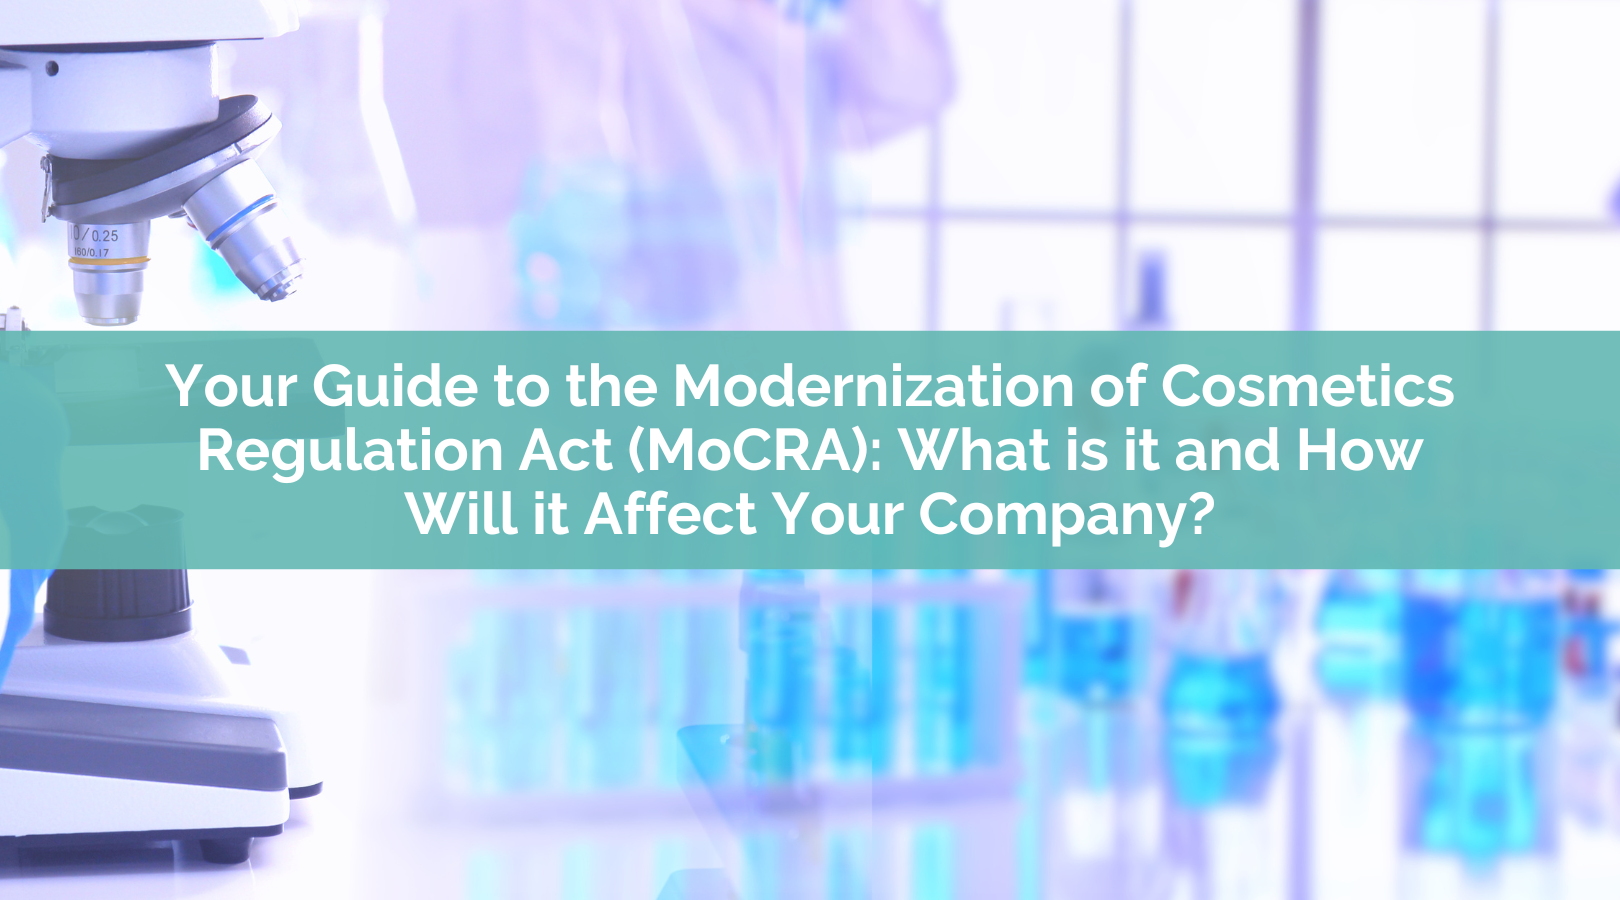 Your Guide to the Modernization of Cosmetics Regulation Act (MoCRA): What Is It and How Will it Affect Your Company?